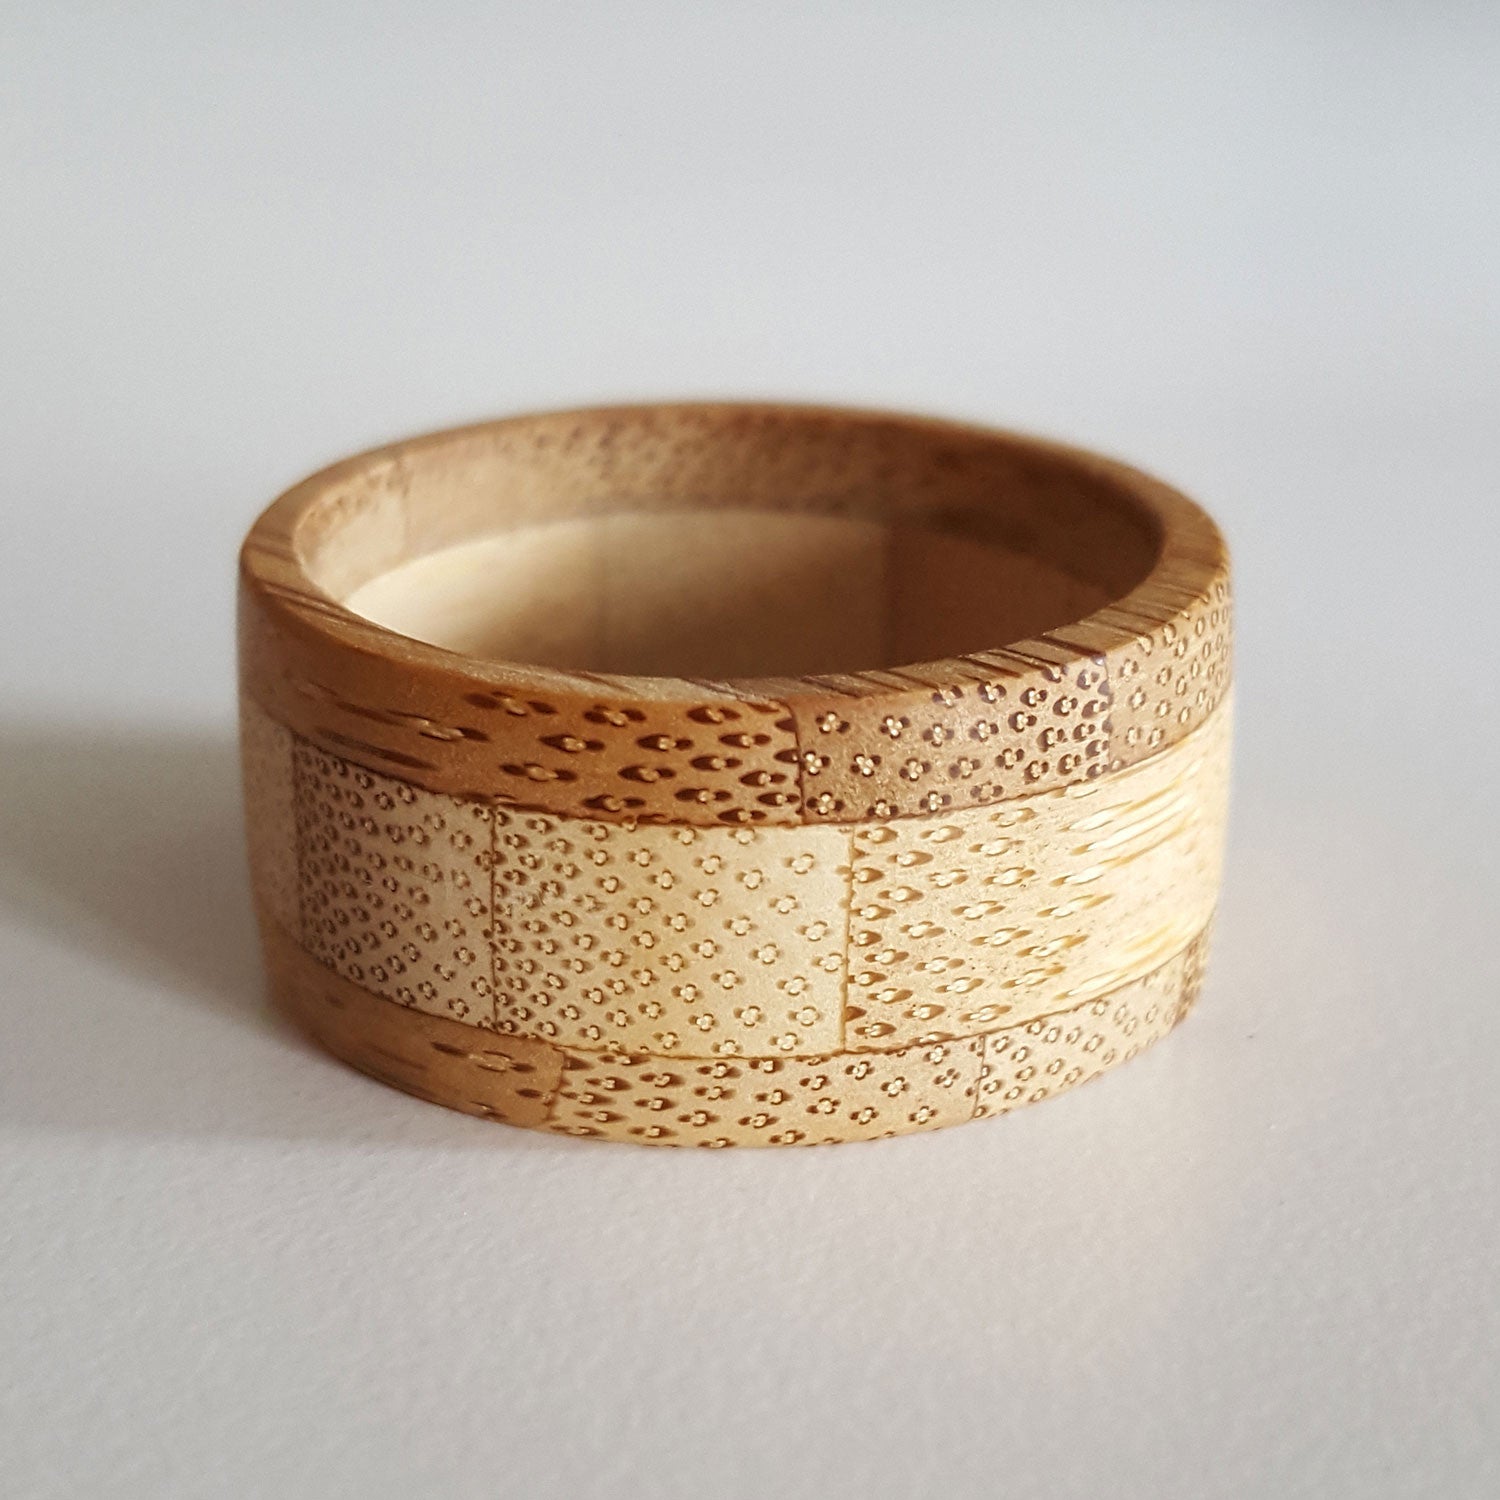 Eco-Friendly Engagement Ring - Wooden Engagement Ring